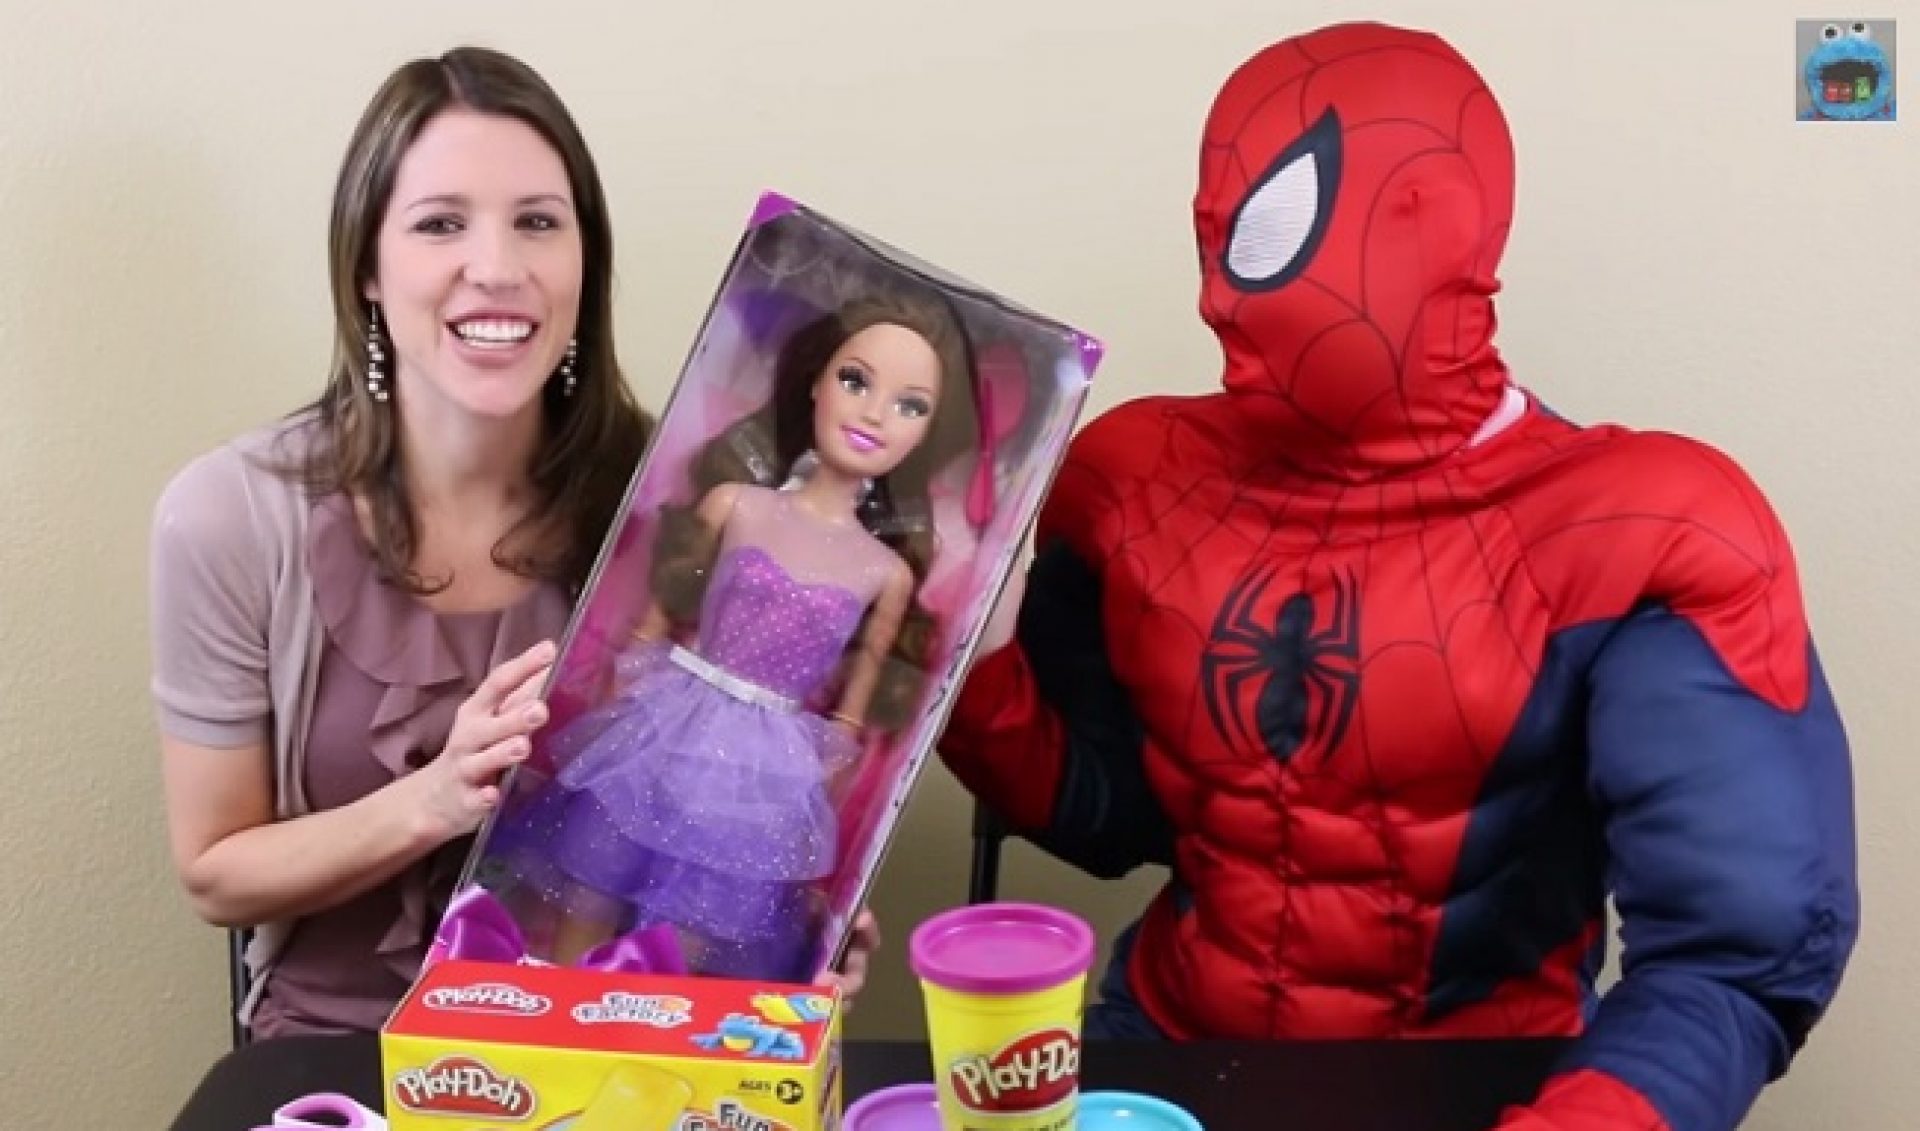 Maker Studios Adds Five Toy Channels With 300 Million Collective Monthly Views